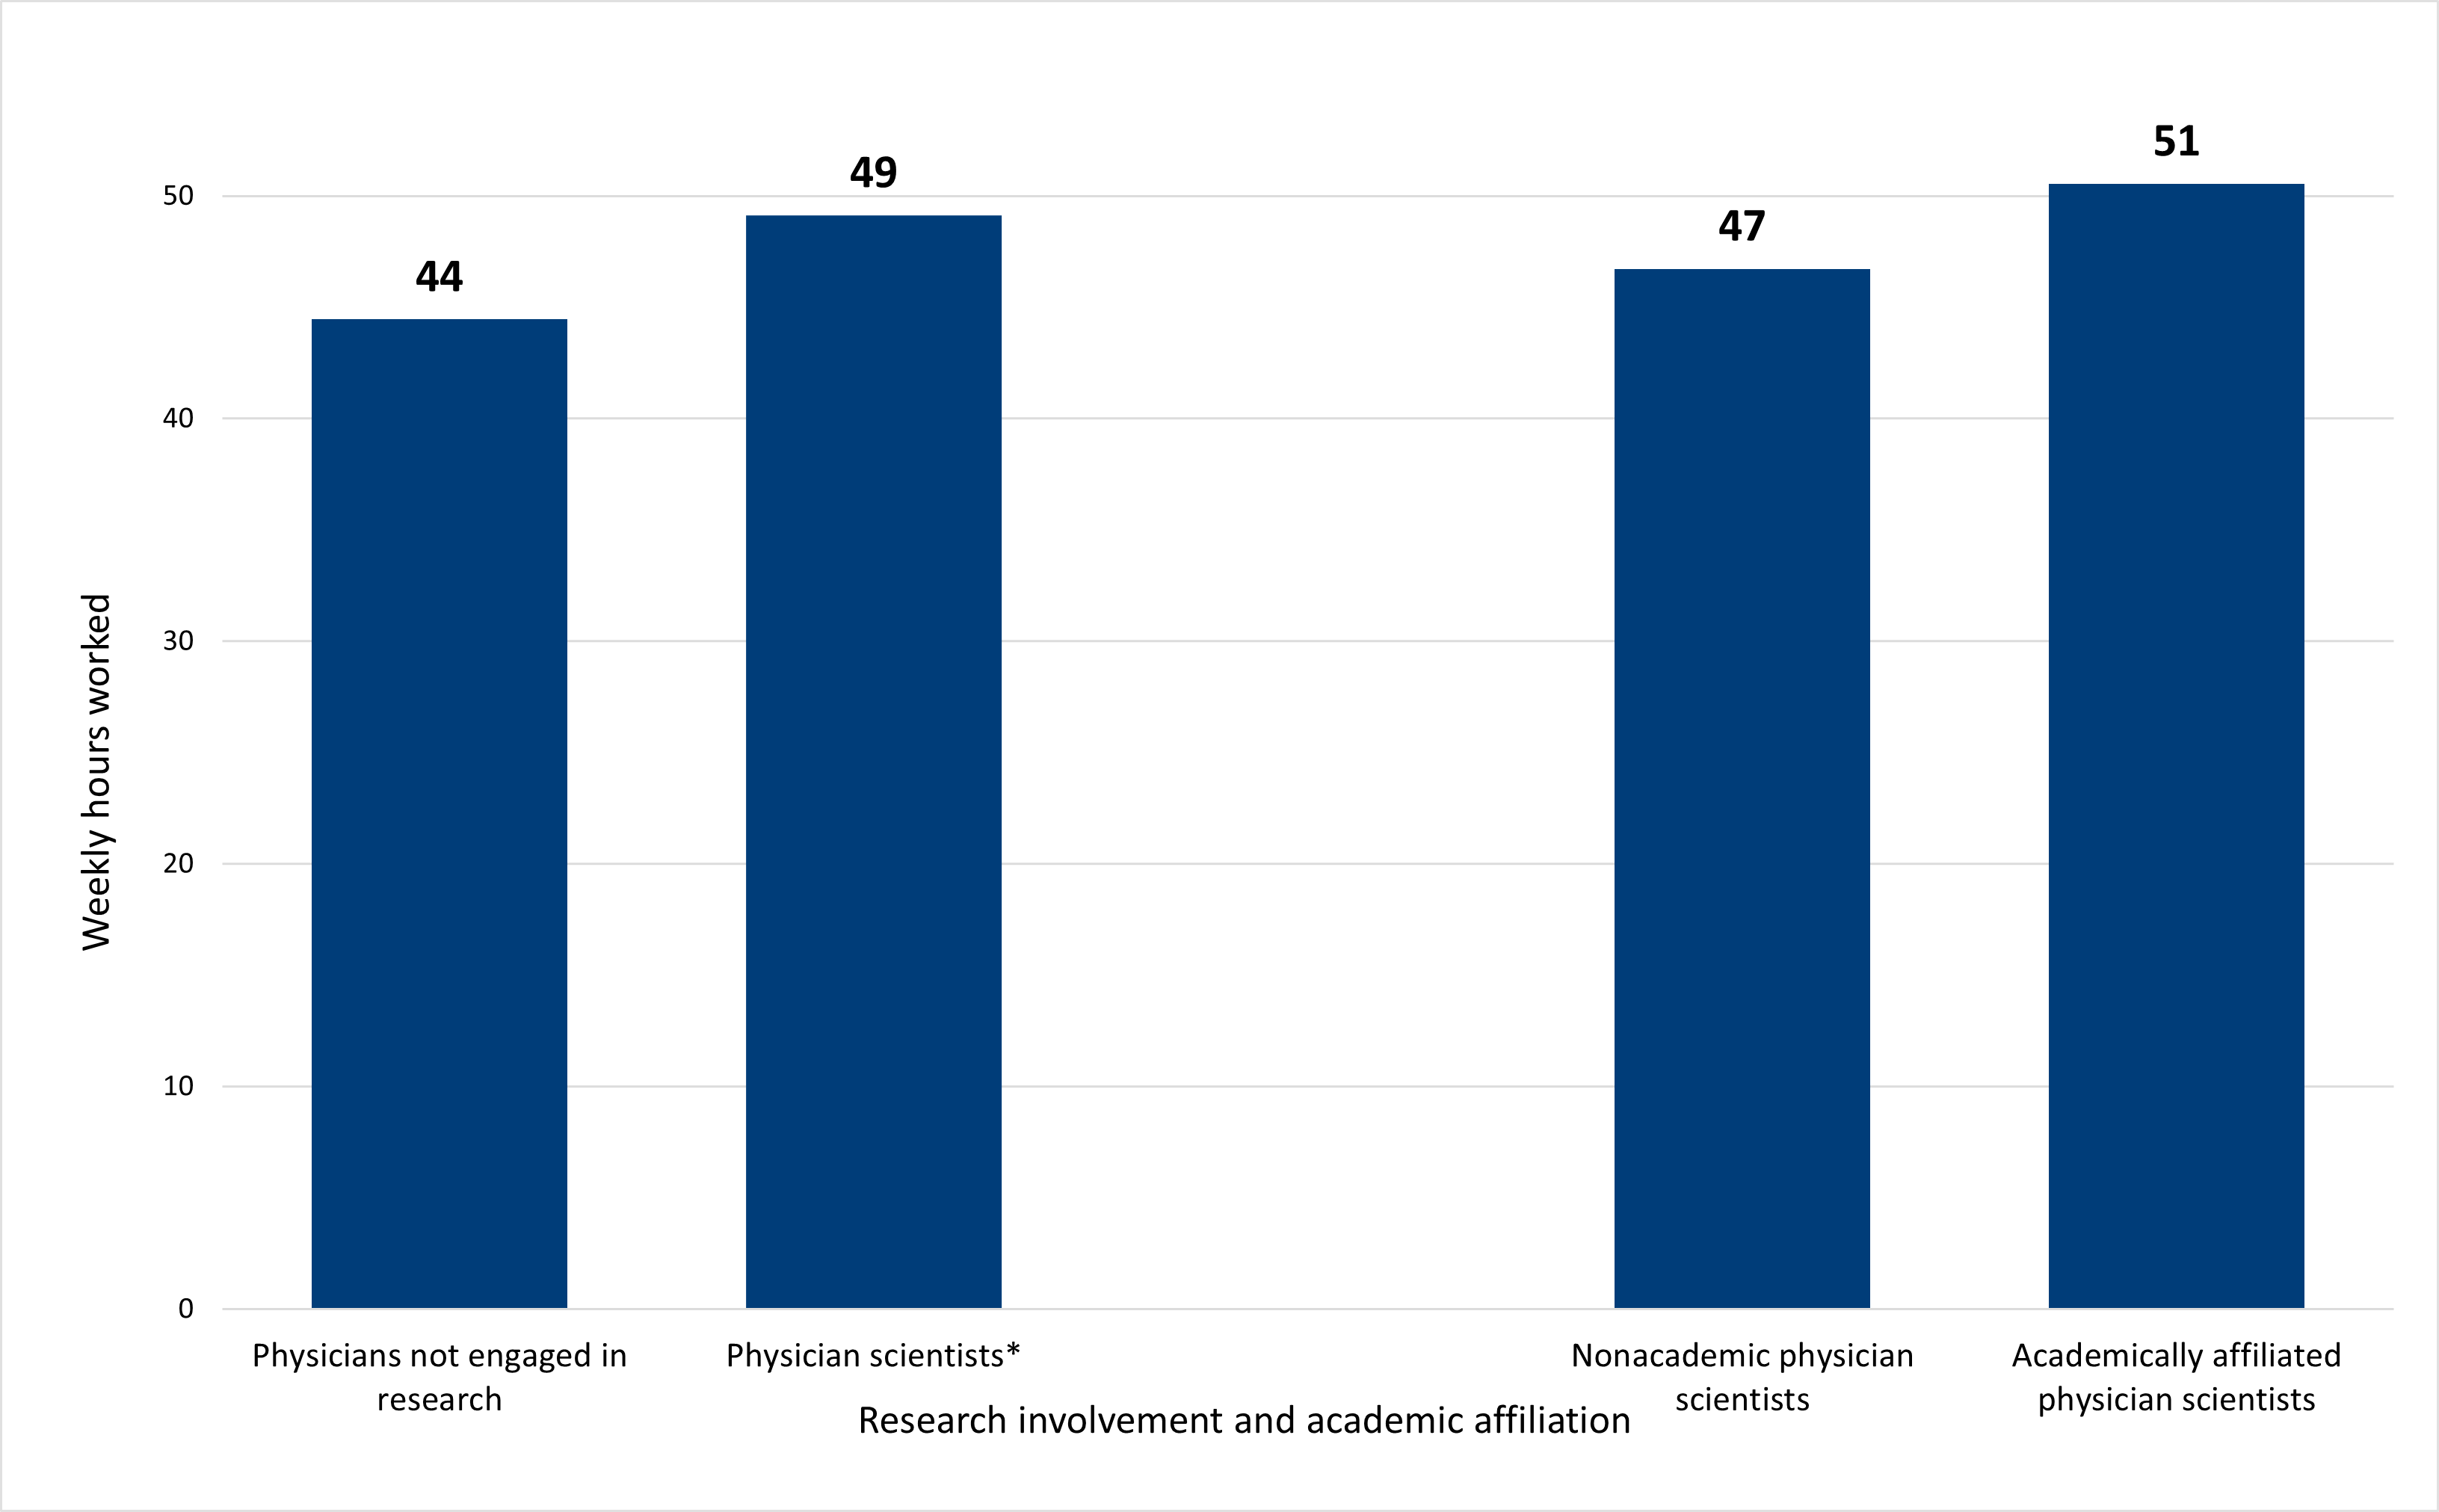 Column graph showing the work hours of physician scientists vs physicians overall and for physician scientists by academic affiliation. Physician scientists worked an average of 5 additional hours each week compared to physicians not engaged in research (49 vs 44). Within the subgroup of physician scientists, academically affiliated physician scientists reportedly worked more hours on average than their counterparts (51 vs 47). 